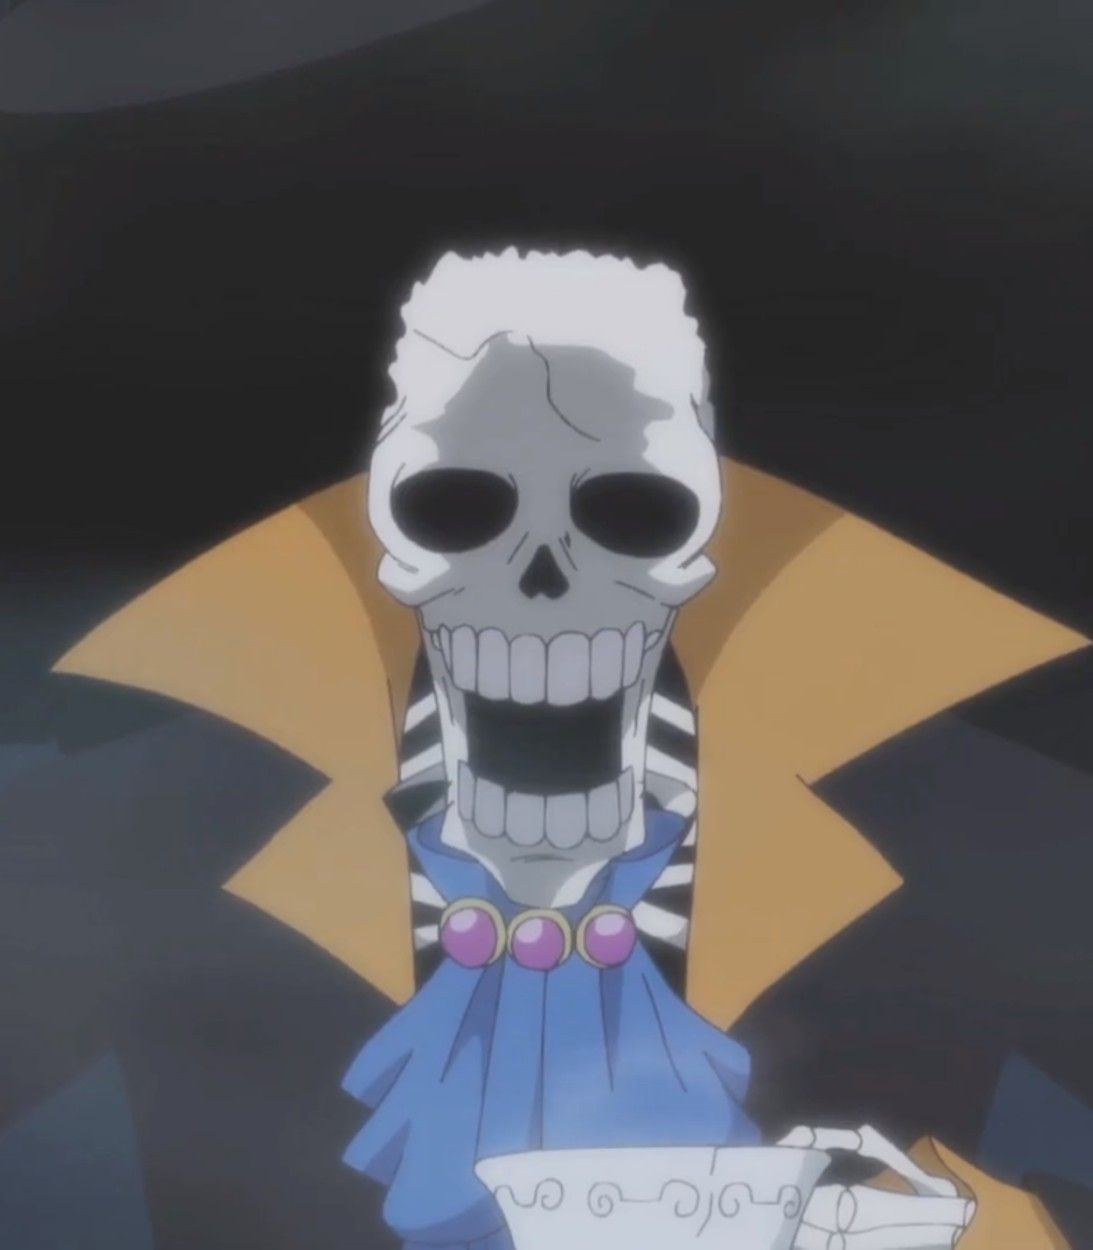 brook the skeleton has a cup of tea in one piece